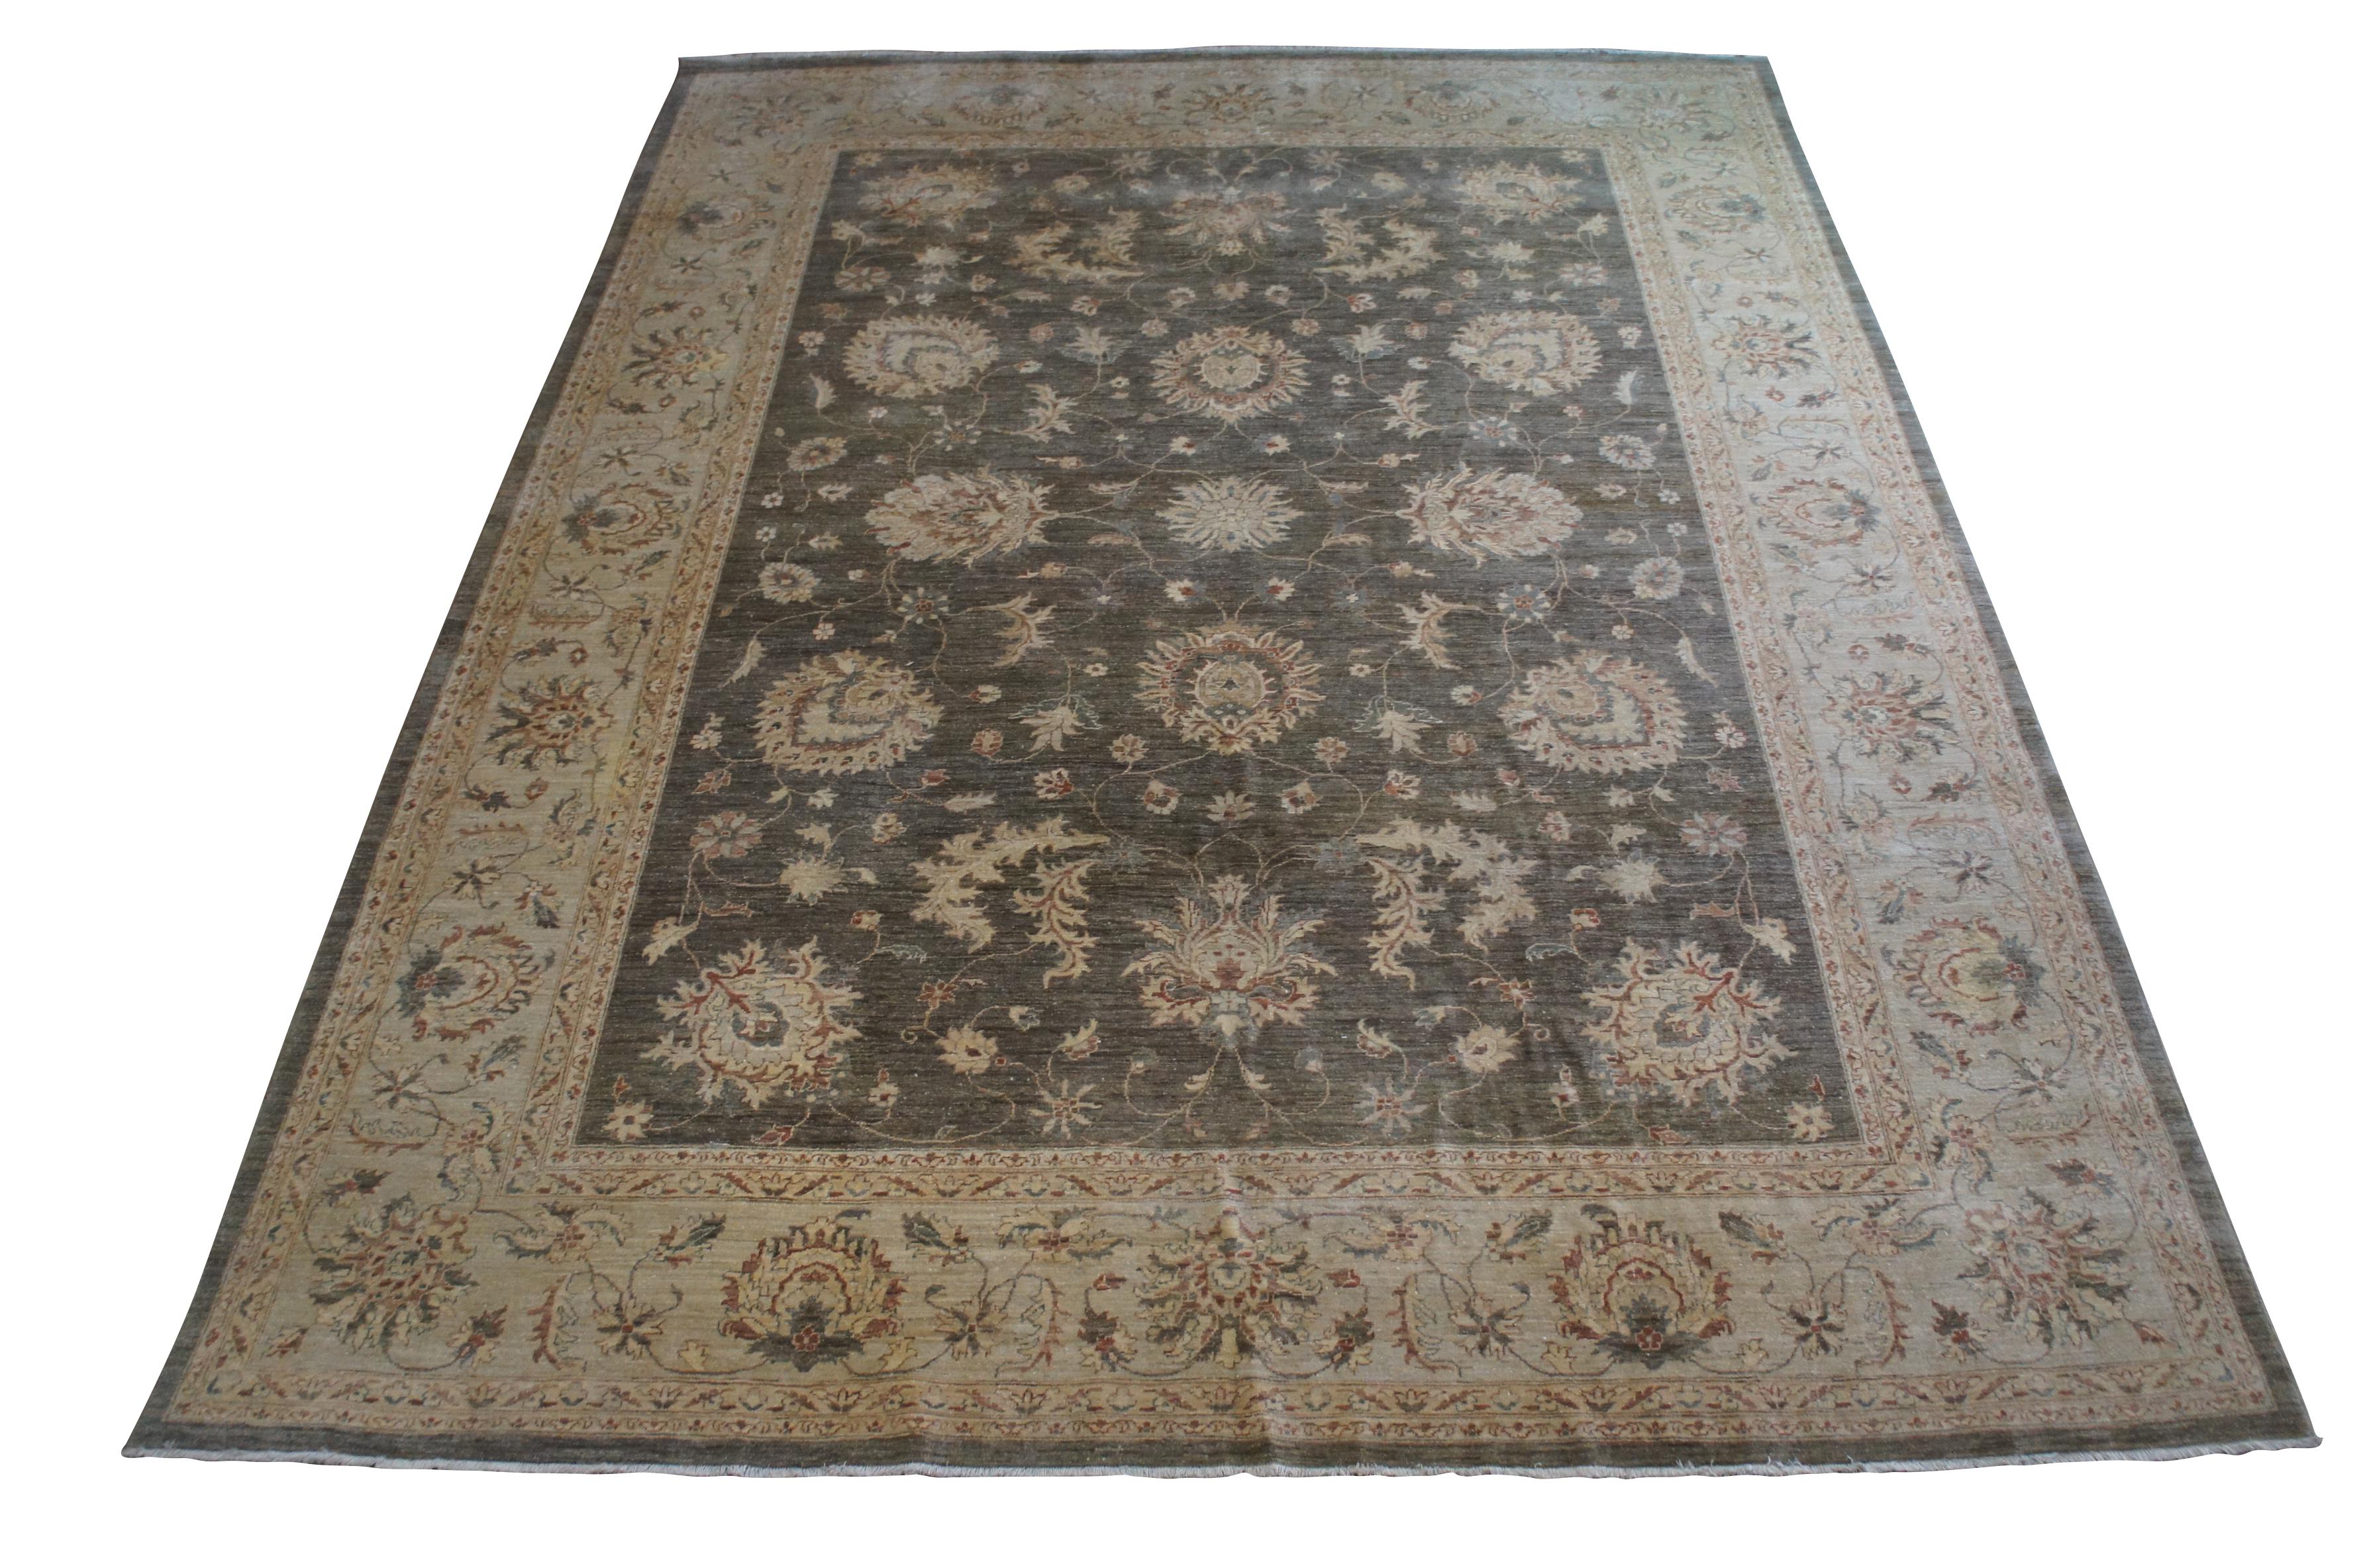 A stunning Turkish wool area rug.

Oushak rugs, also known as Ushak rugs, are woven in Western Turkey and have distinct designs, such as angular large-scale floral patterns. They usually evoke a calmness and peacefulness in a room. To this day,